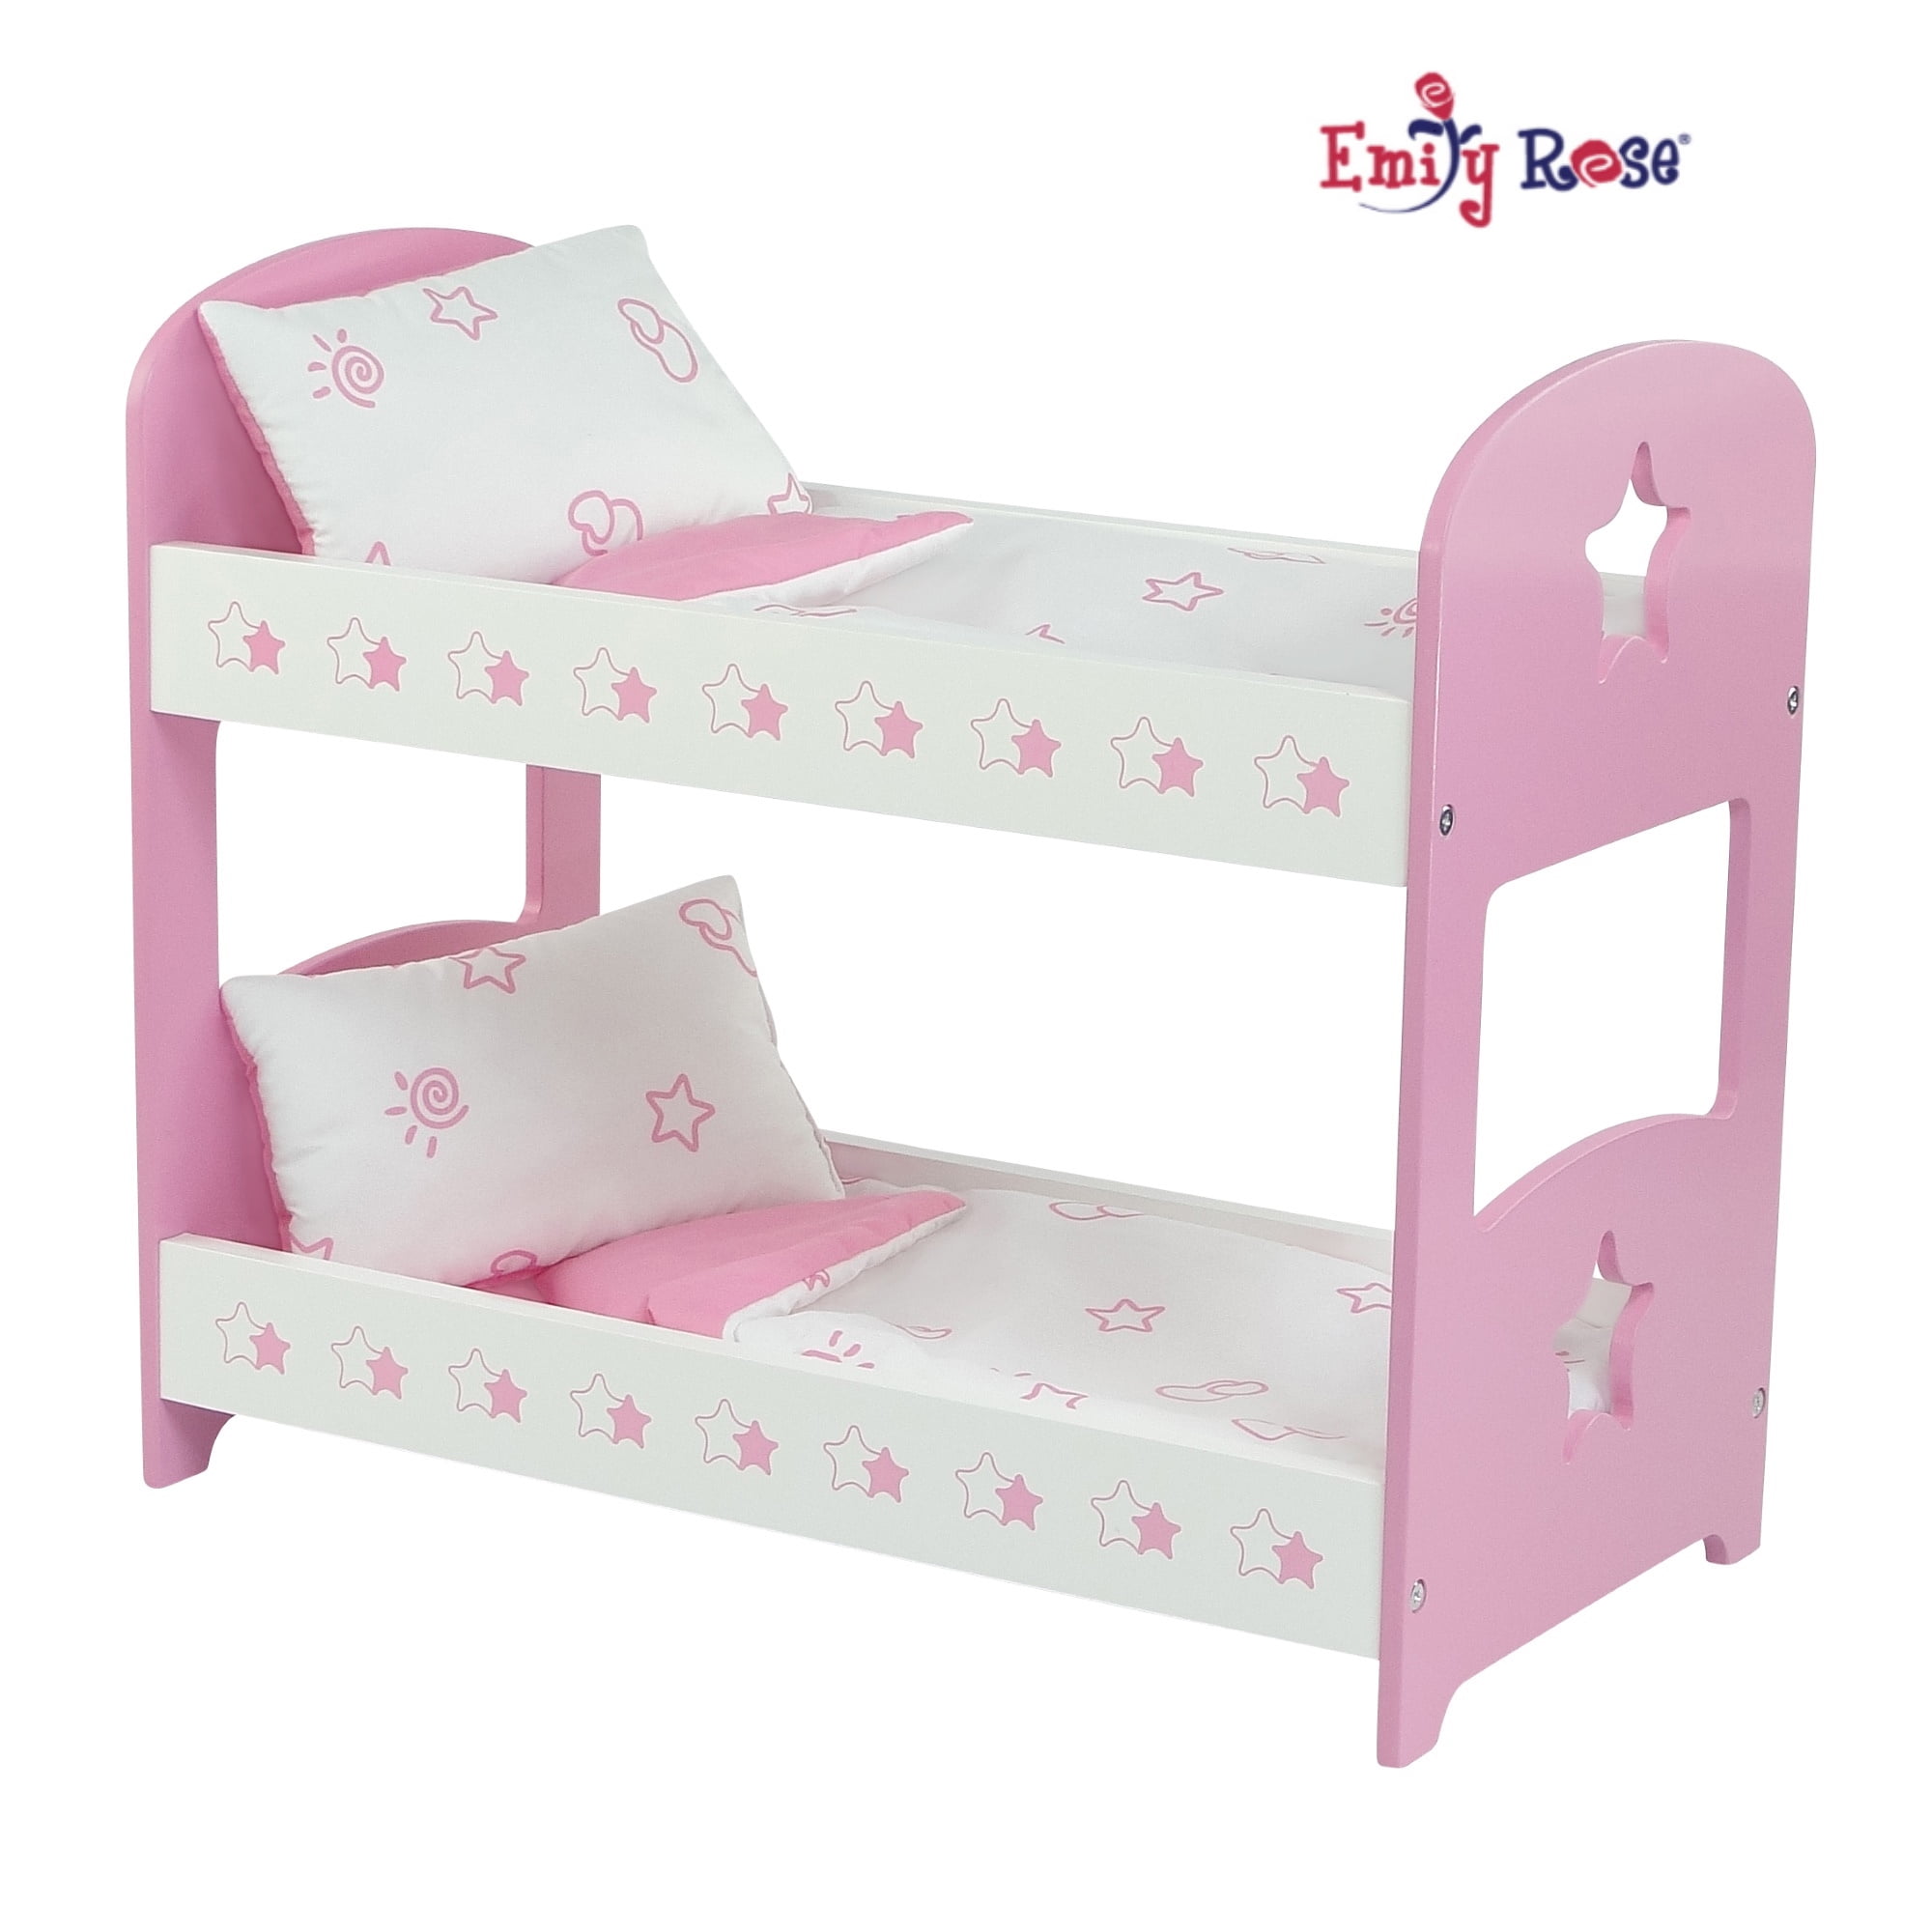 18 Inch Doll Bunk Bed Furniture, 18 Inch Doll Bunk Bed Bedding